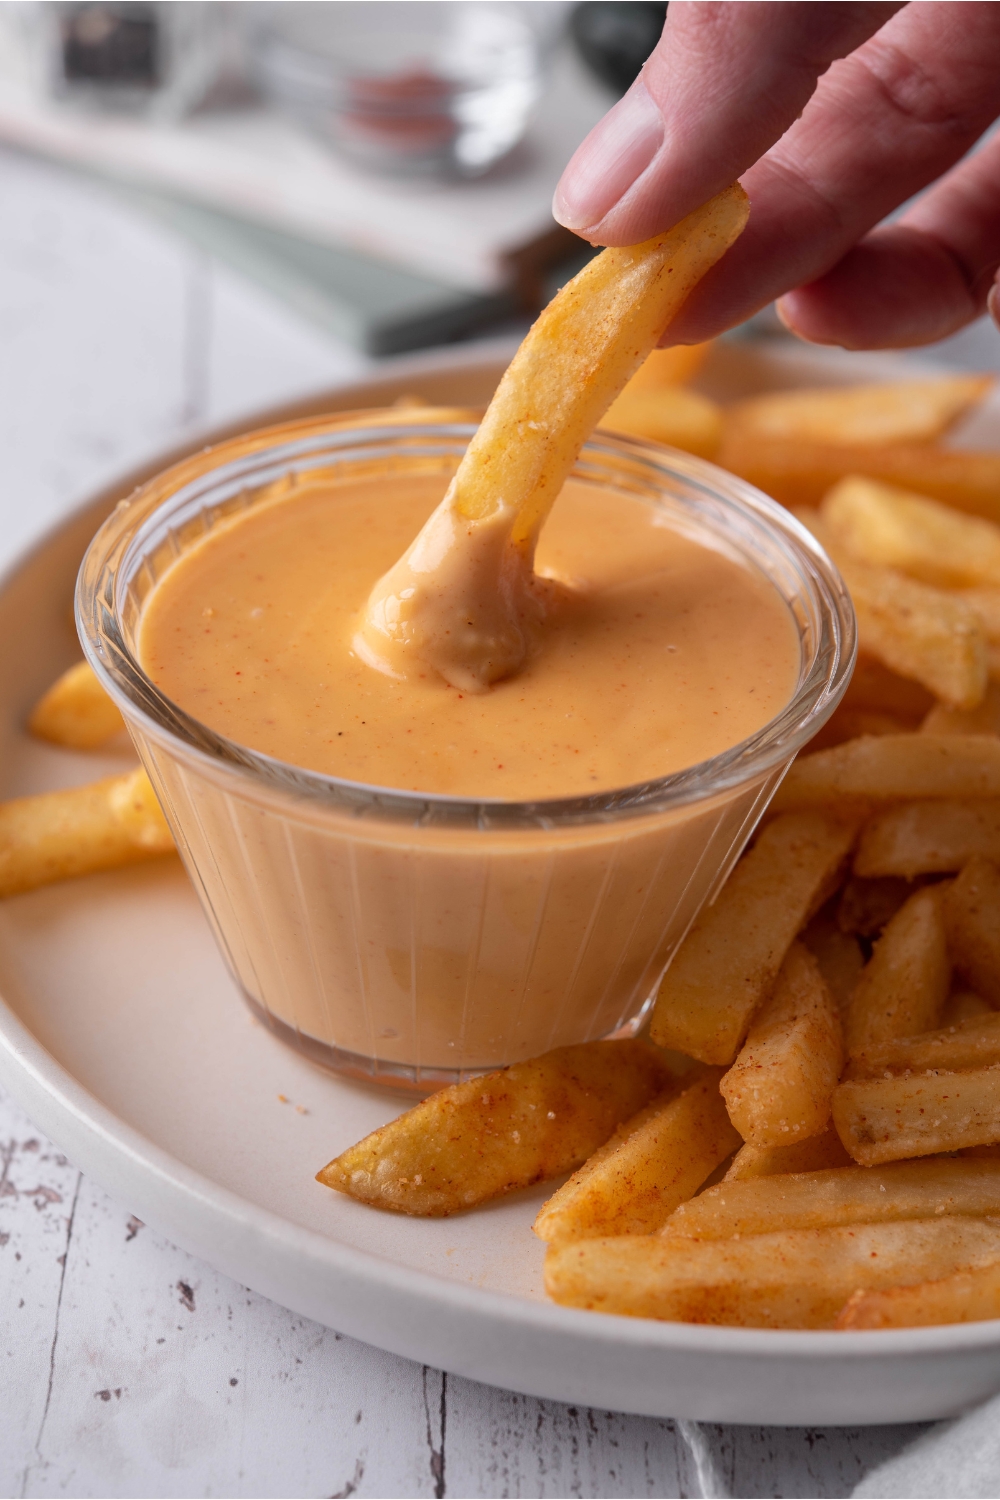 A hand dipping a french fry into a clear bowl of melted cheese sauce. The bowl of sauce is on a plate filled with seasoned french fries.